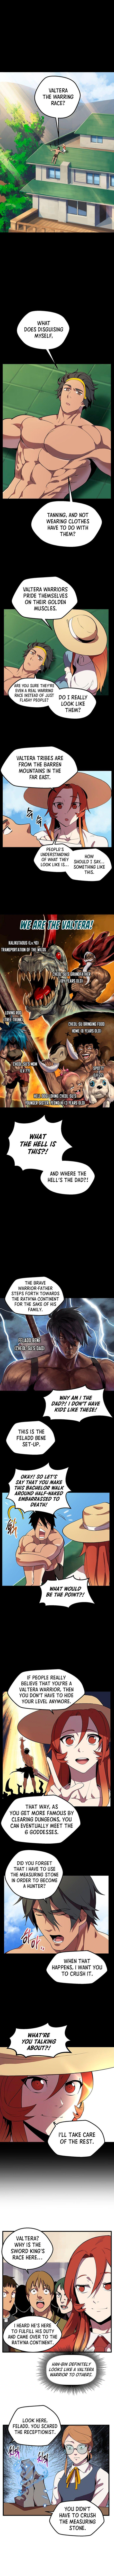 Survival Story Of A Sword King In A Fantasy World 24 3